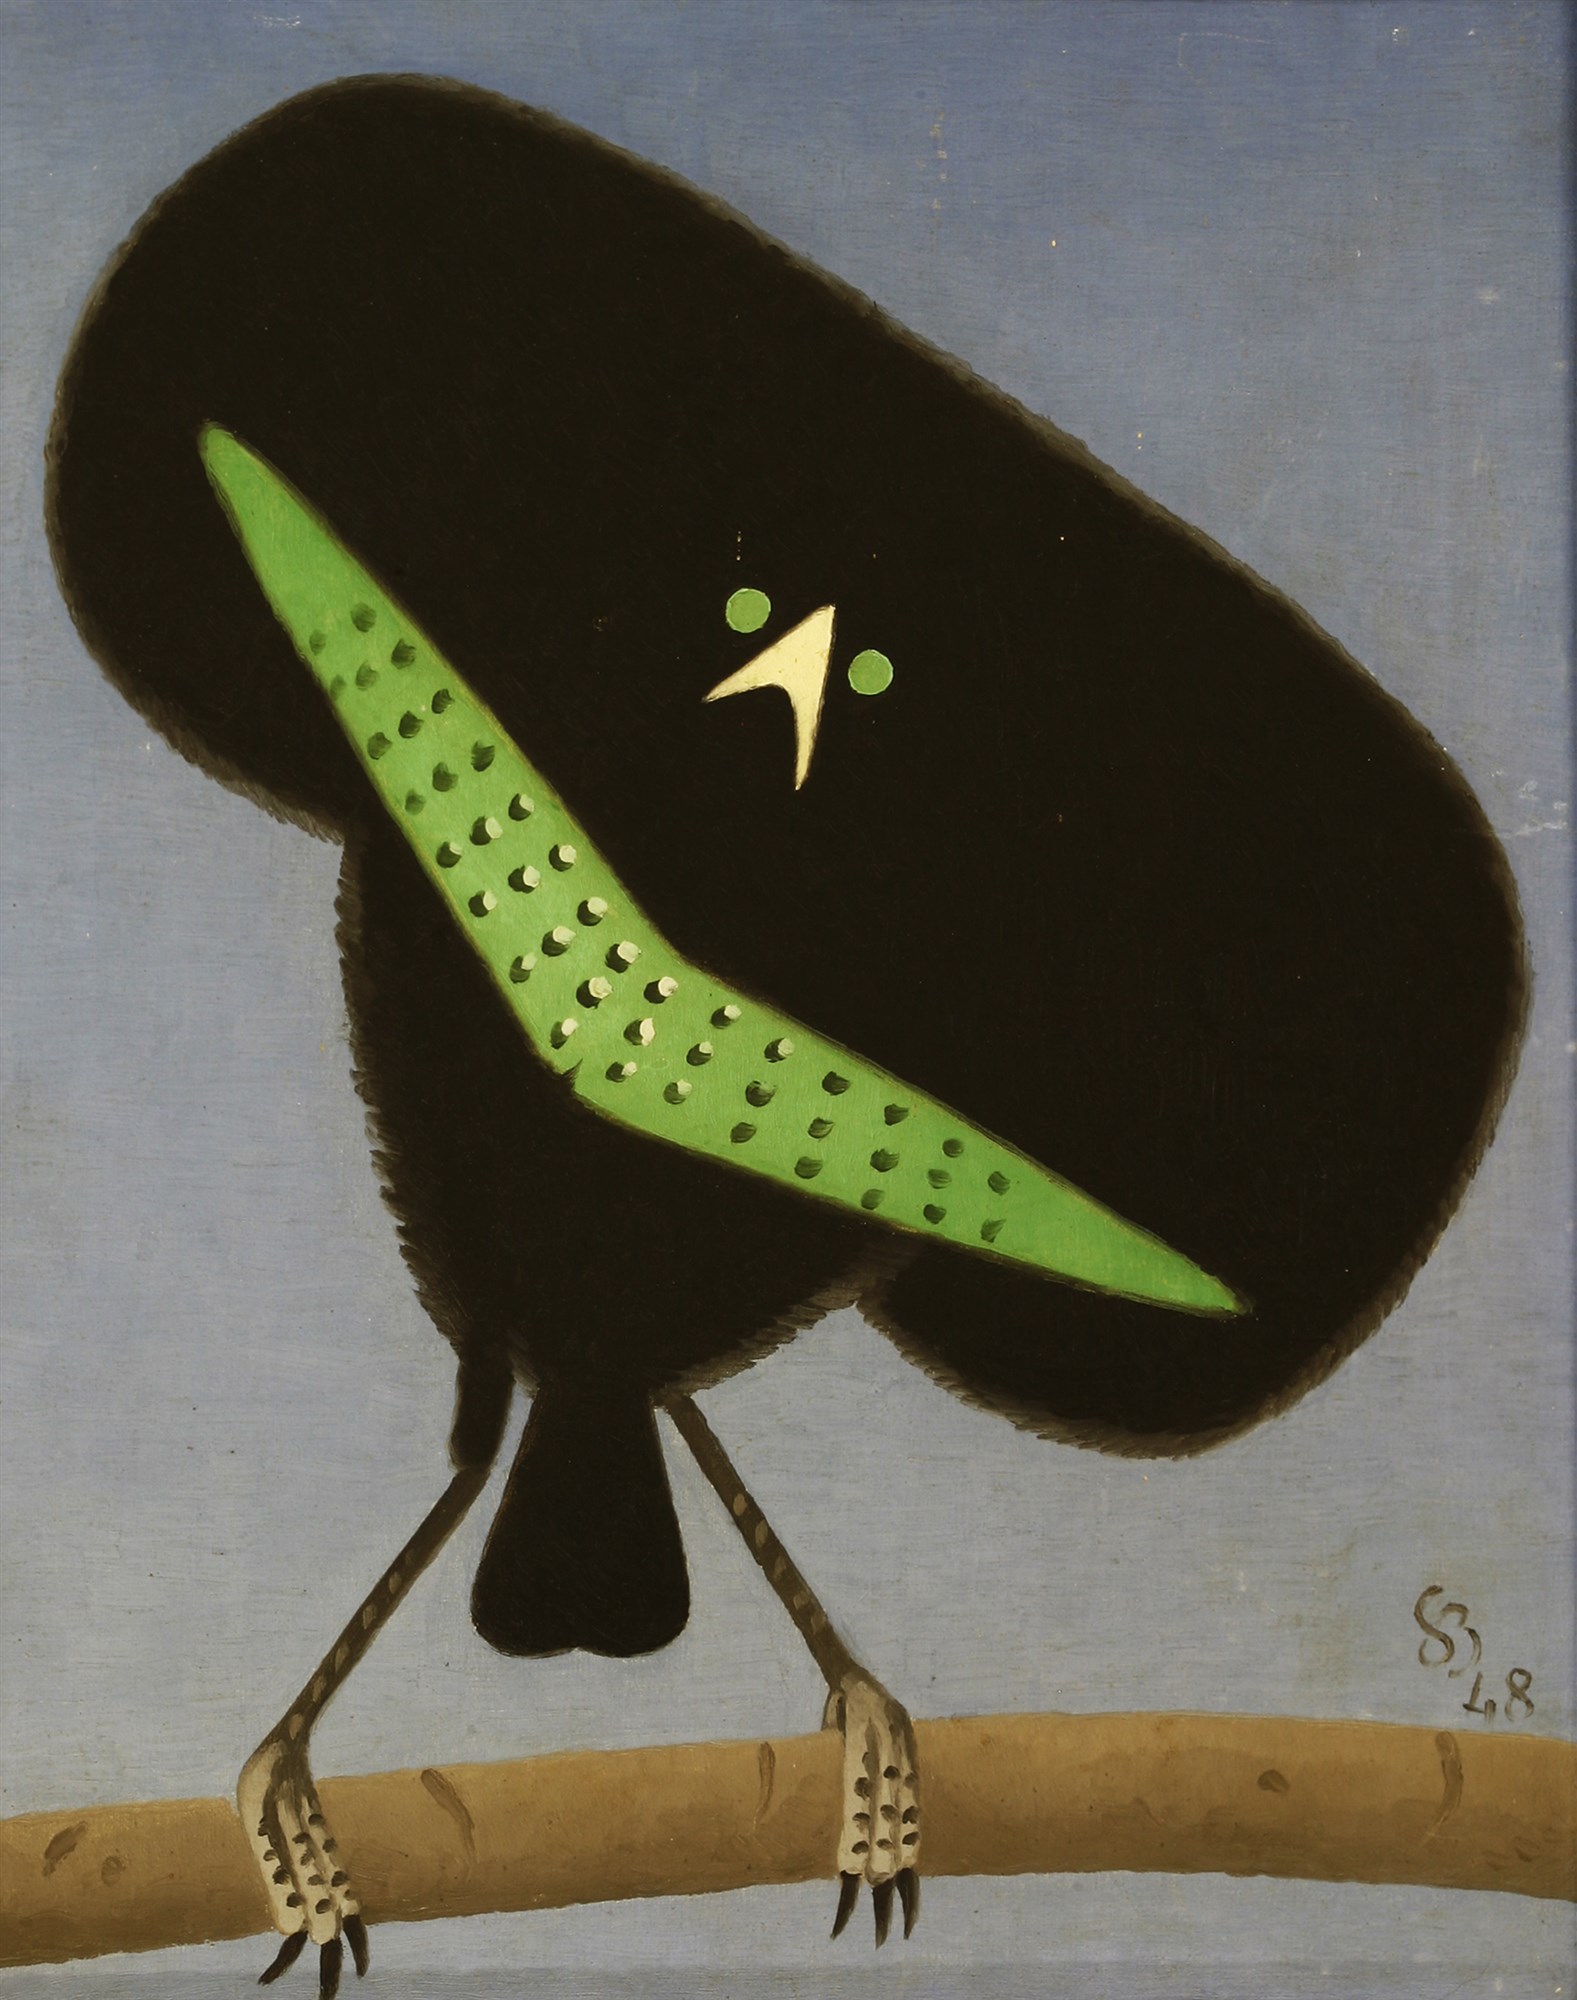 Simon Bussy (French, 1870-1954) BIRD OF PARADISE ON A BRANCH. Sold for £16,000 plus buyer’s premium